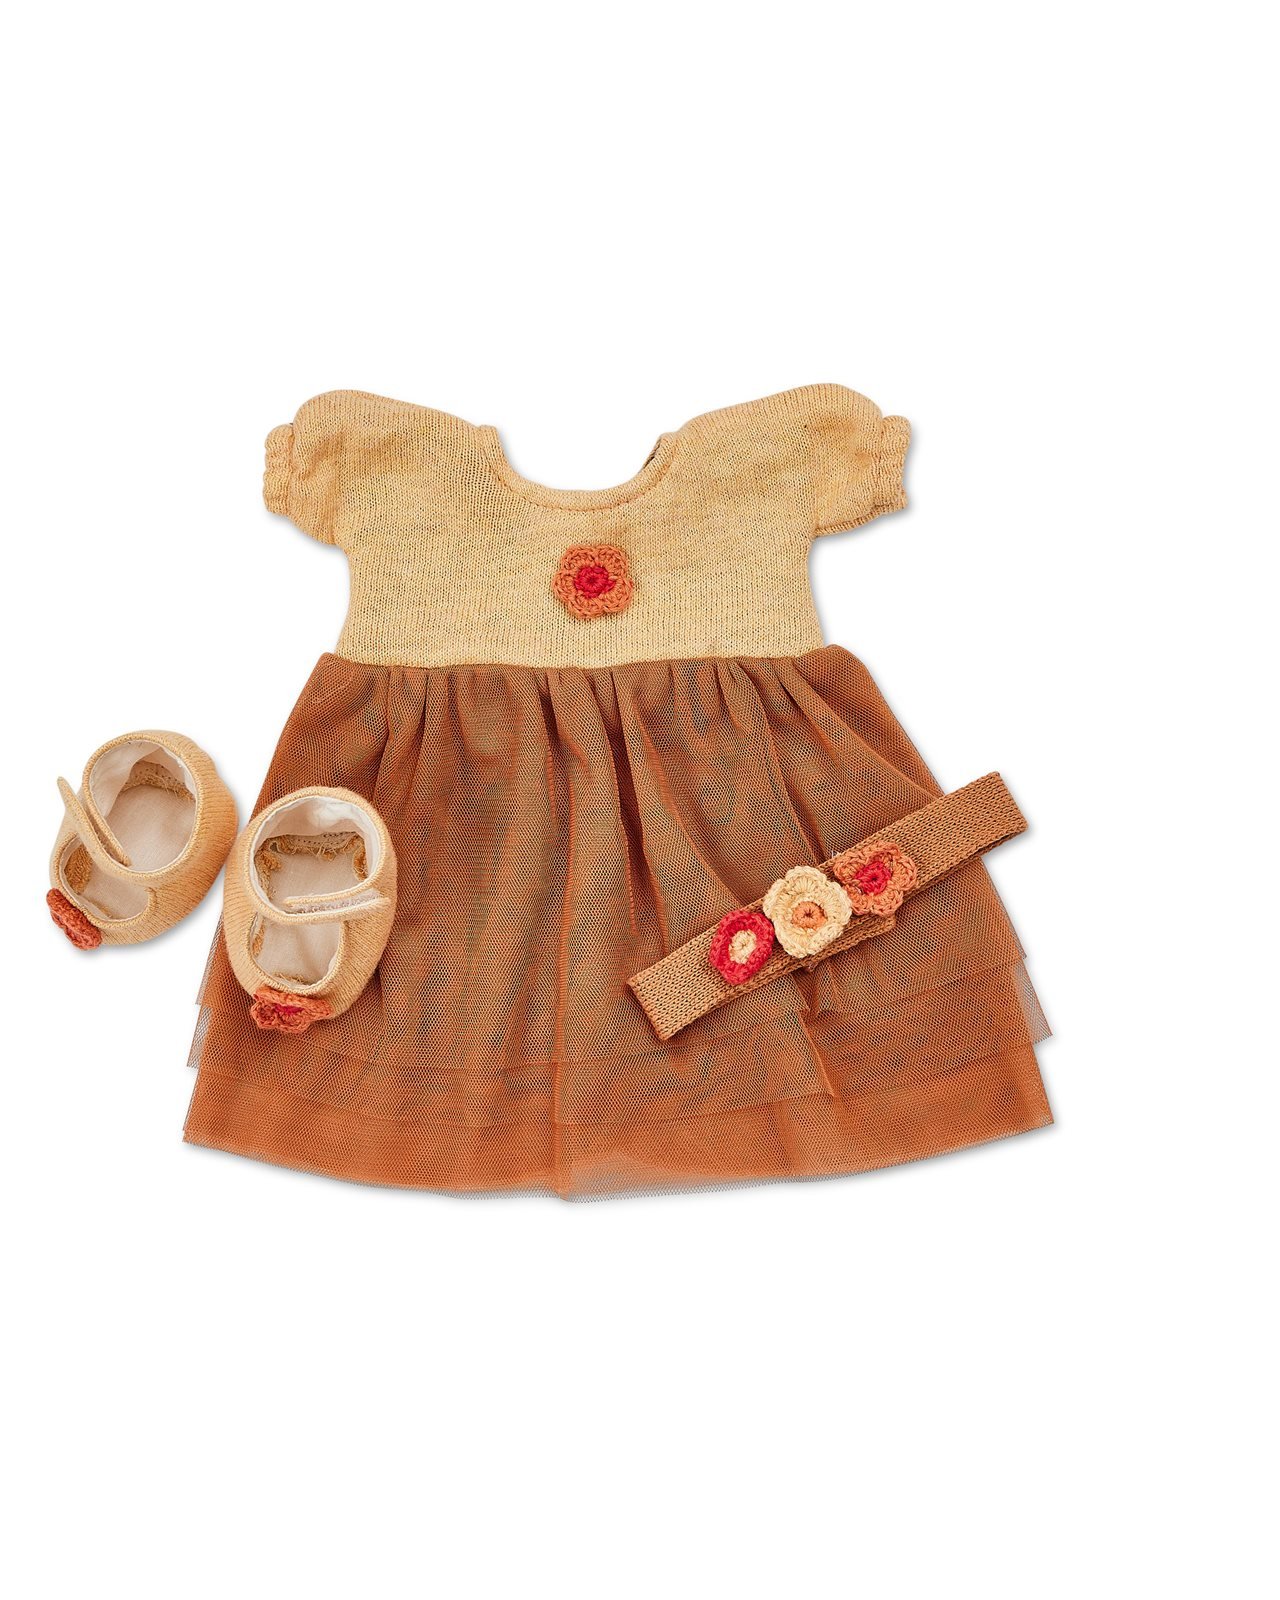 Smallstuff - Doll Clothing, Party Dress w. Shoes And Hair Band